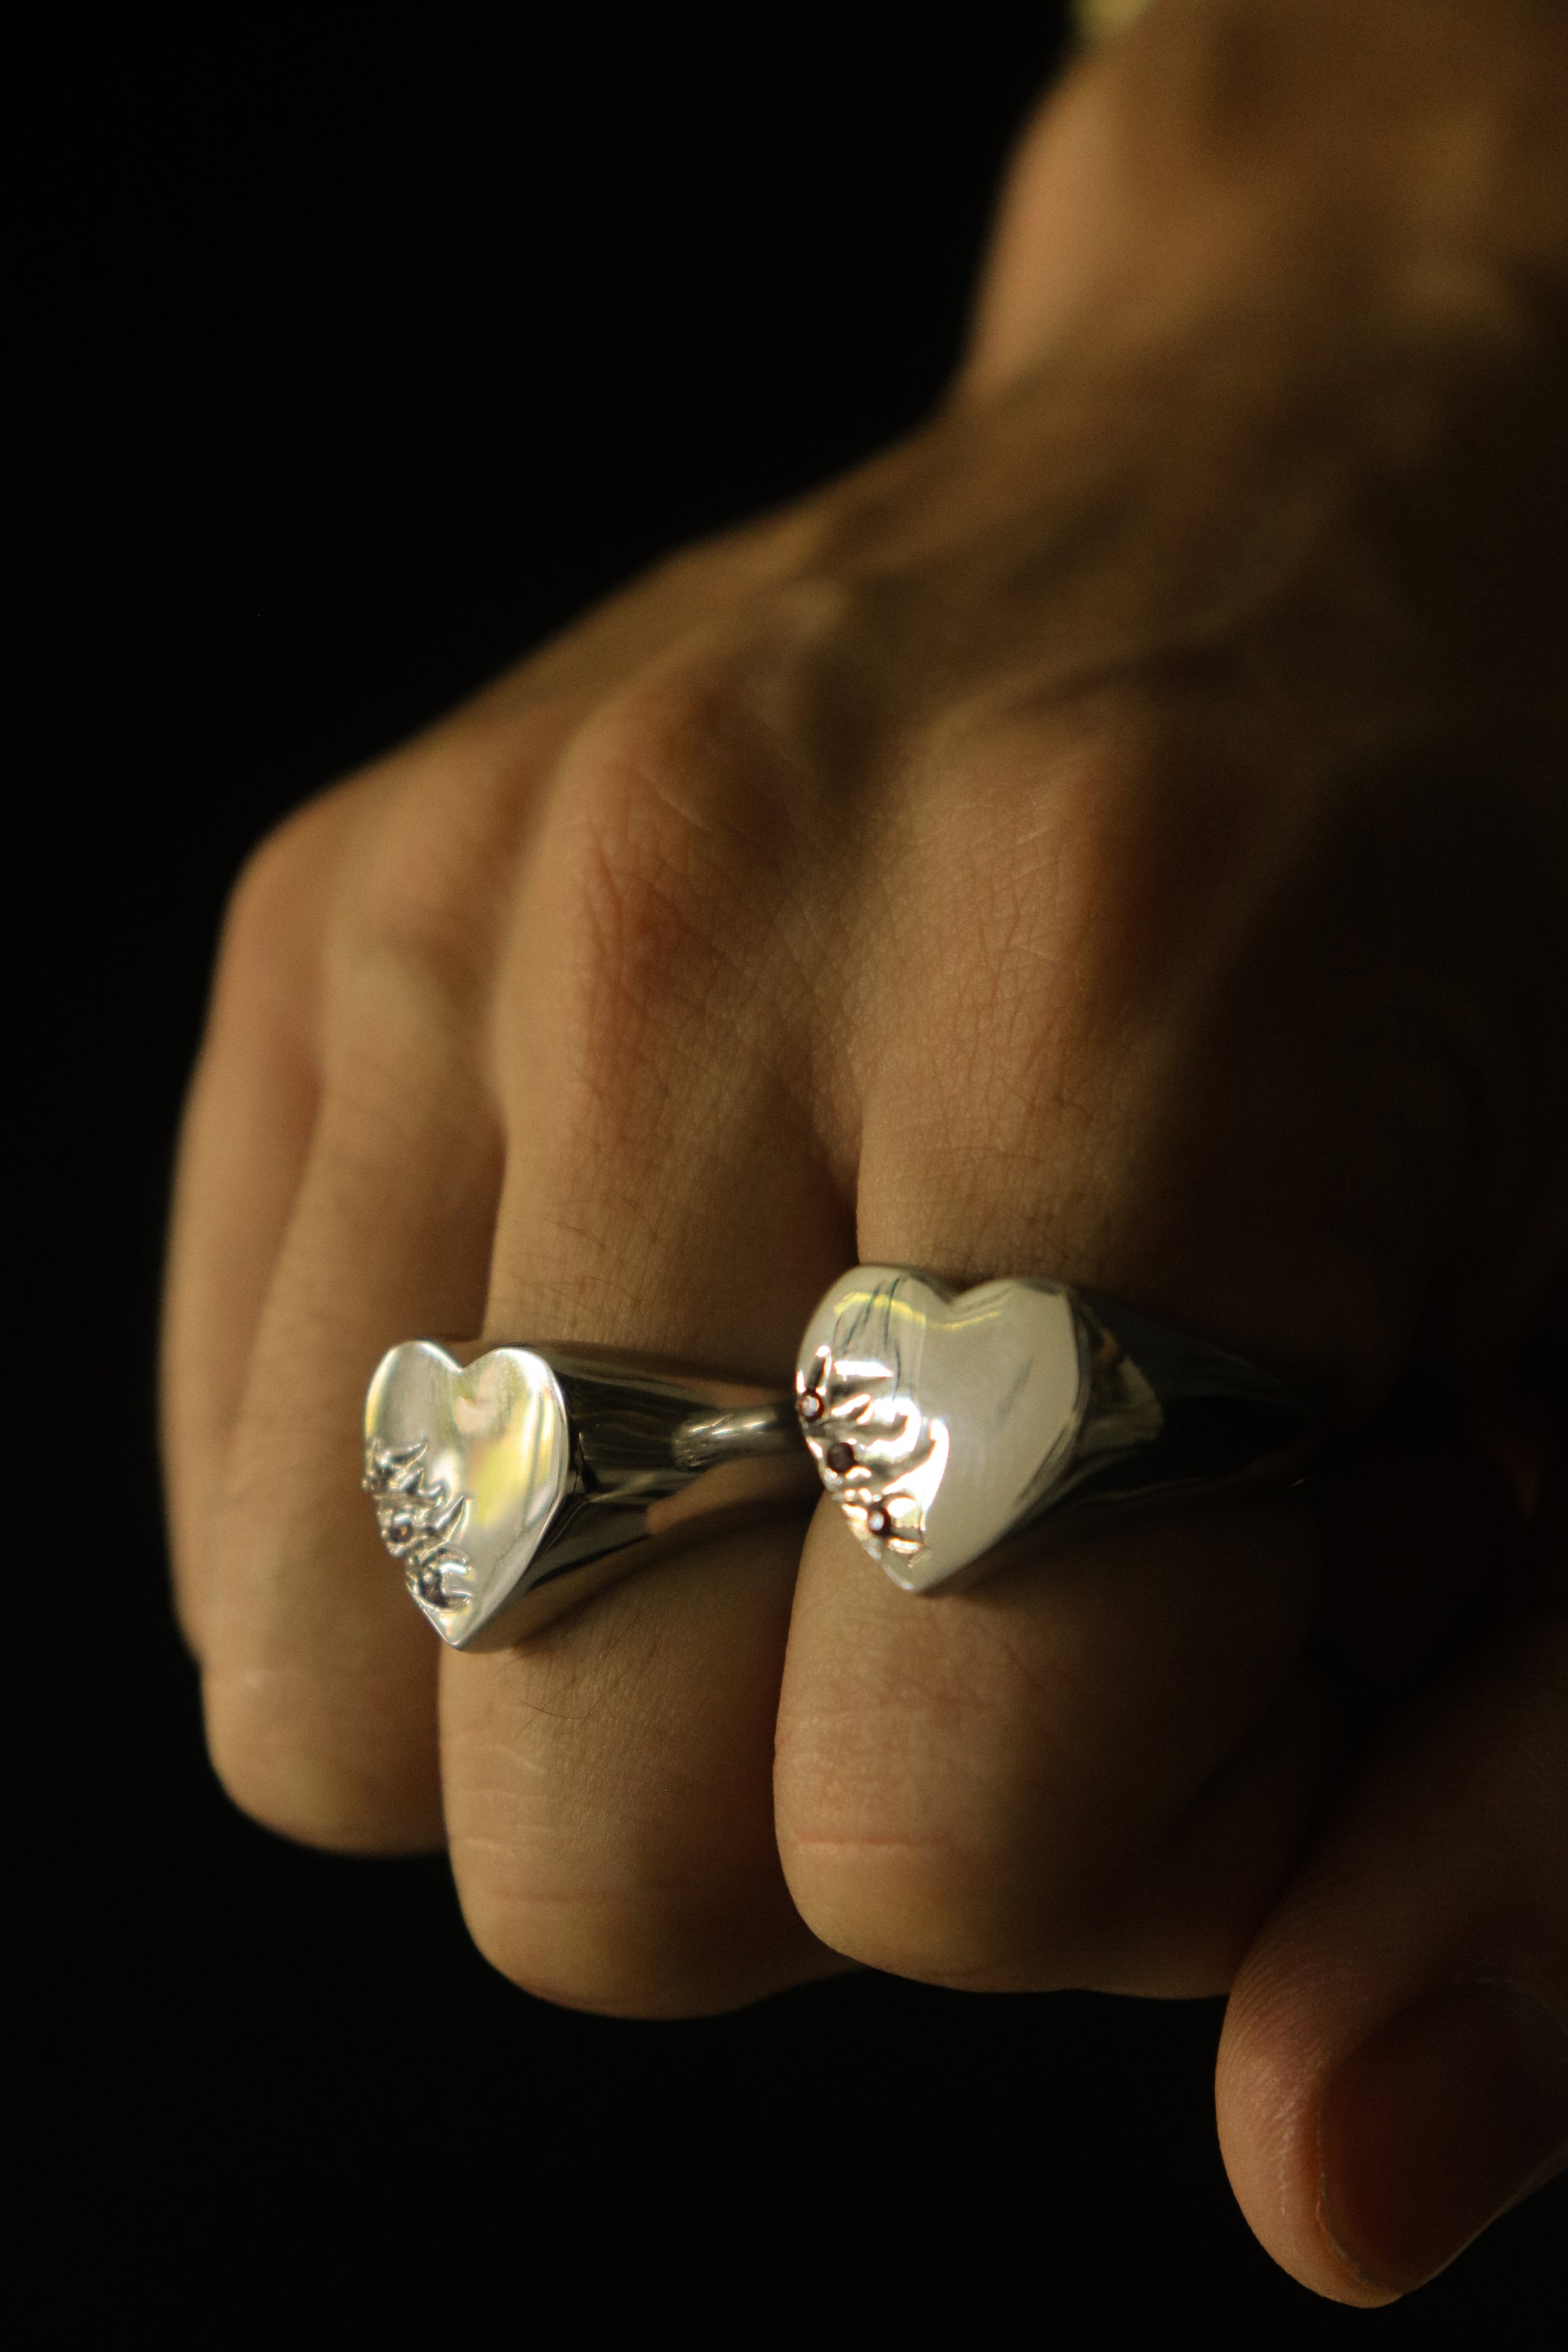 Shattered Love Ring - Fashion Jewelry by Yordy.